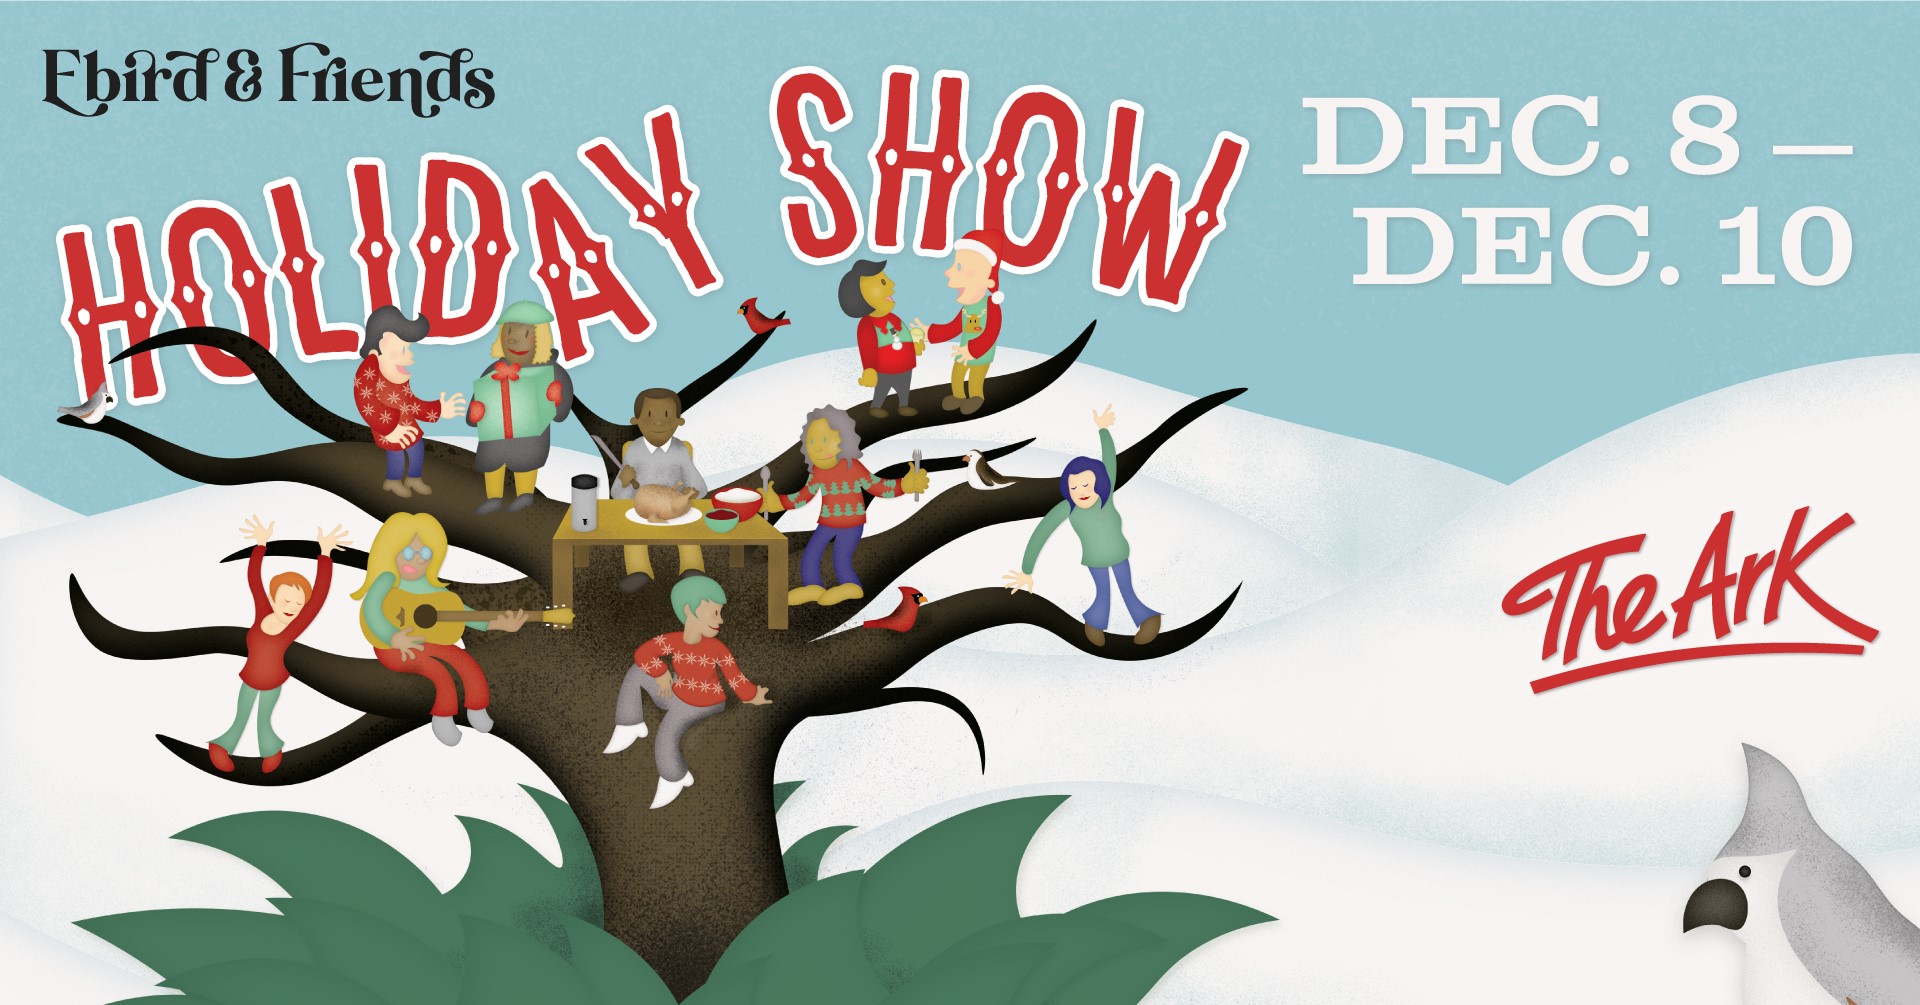 15th Annual Ebird & Friends Holiday Show